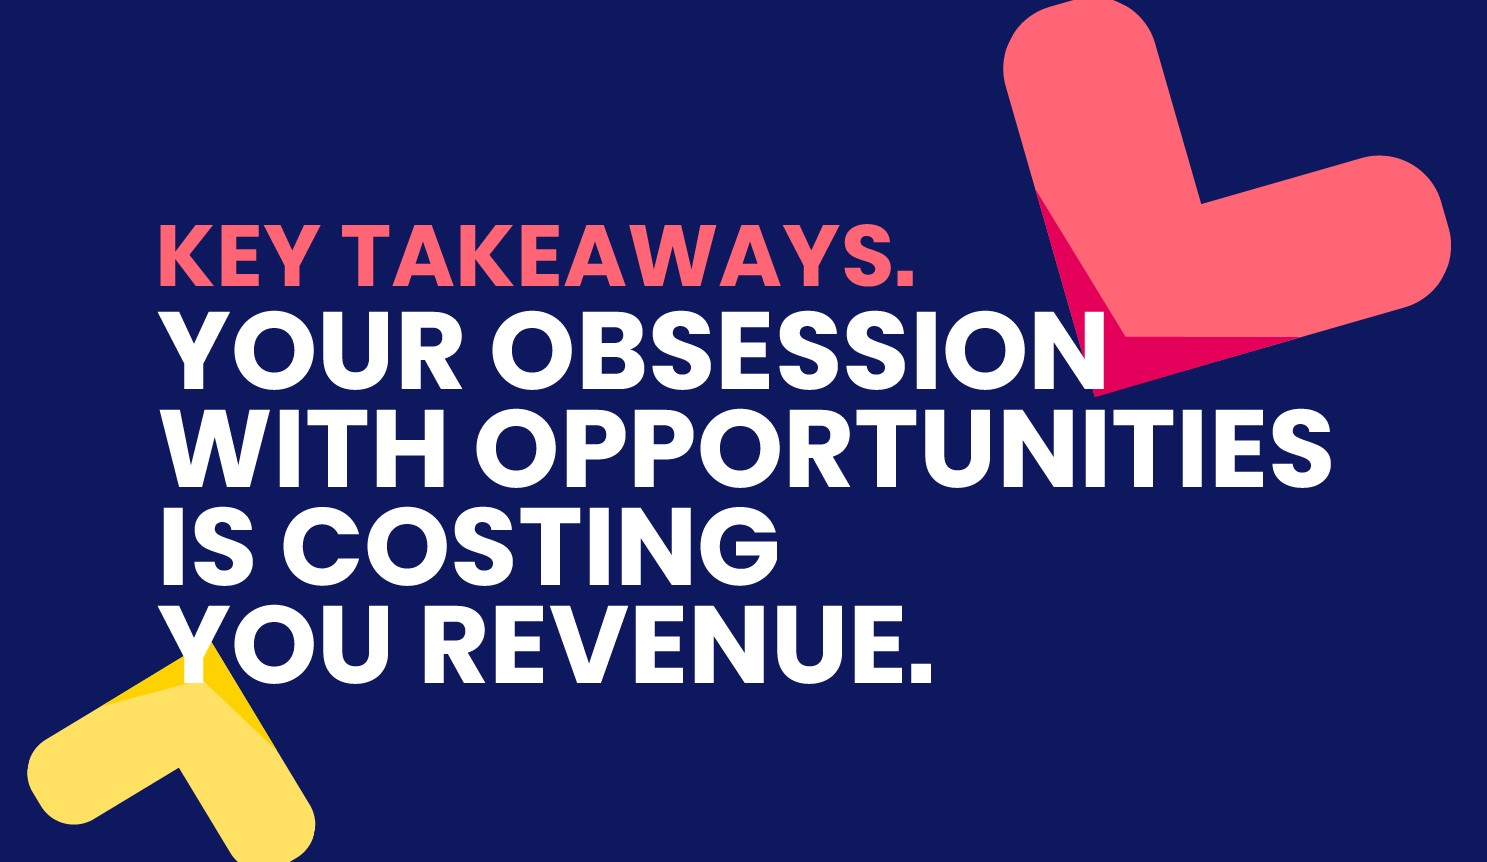 Your Obsession with Opportunities is Costing You Revenue